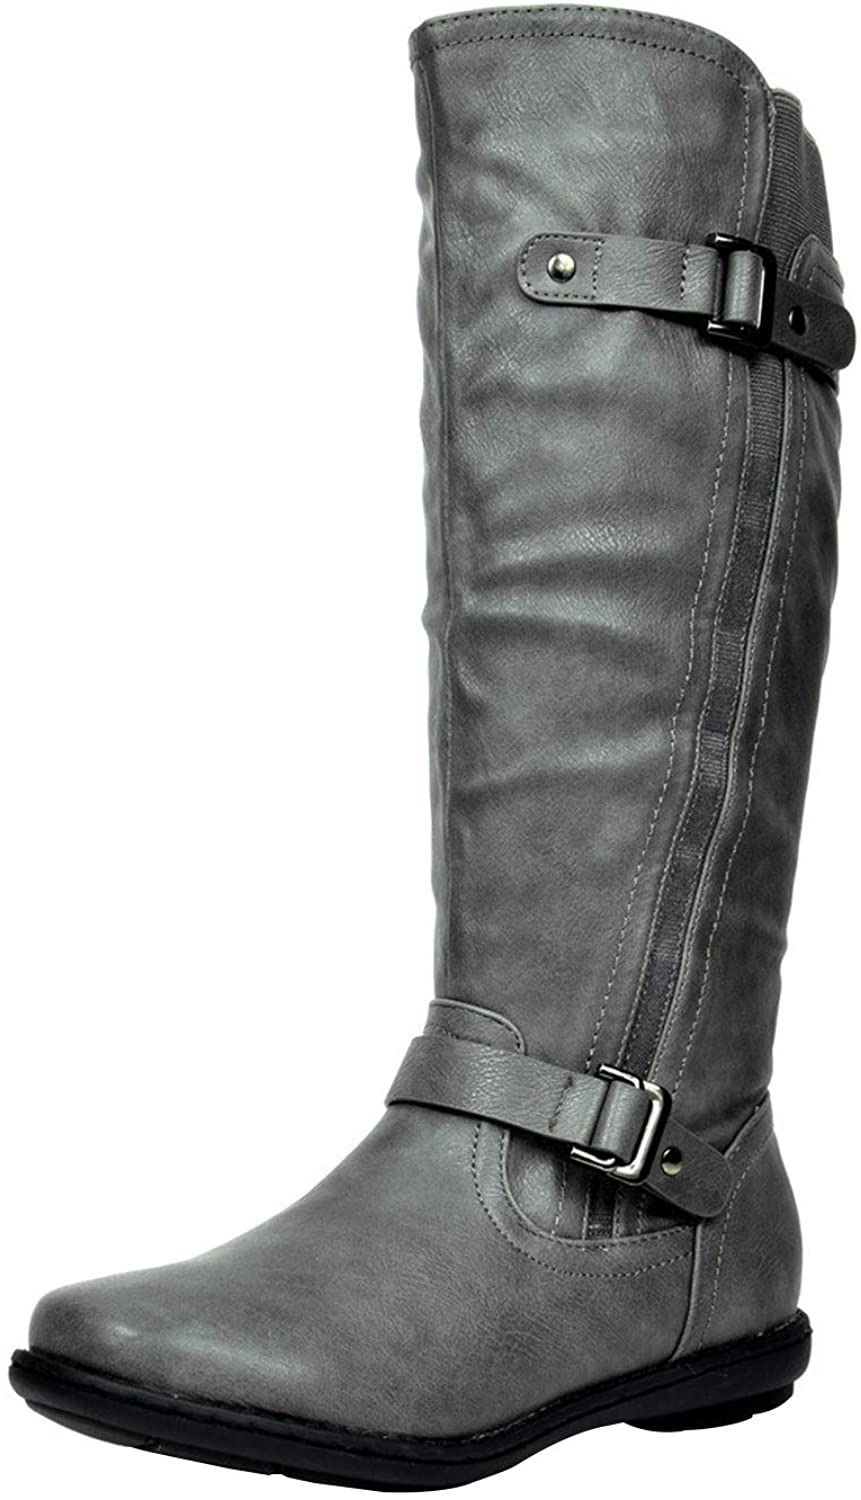 DREAM PAIRS Women's Fur-Lined Knee High Winter Boots Wide Calf